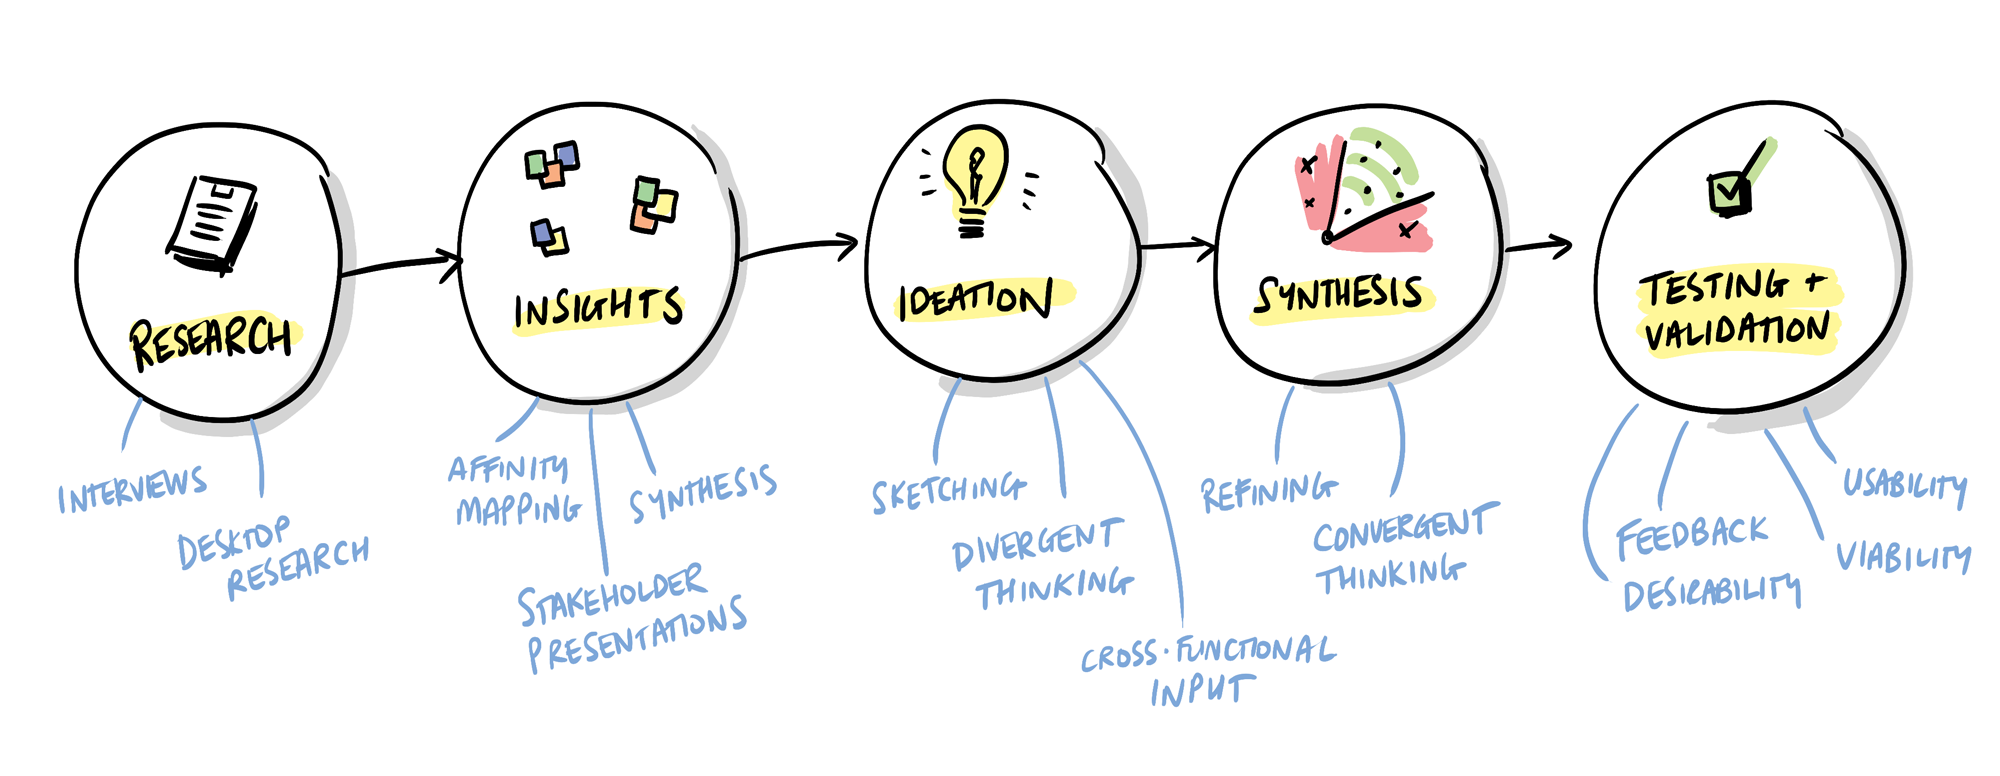 A basic description of the design process: research, synthesis, ideation, synthesis, refinement and testing.